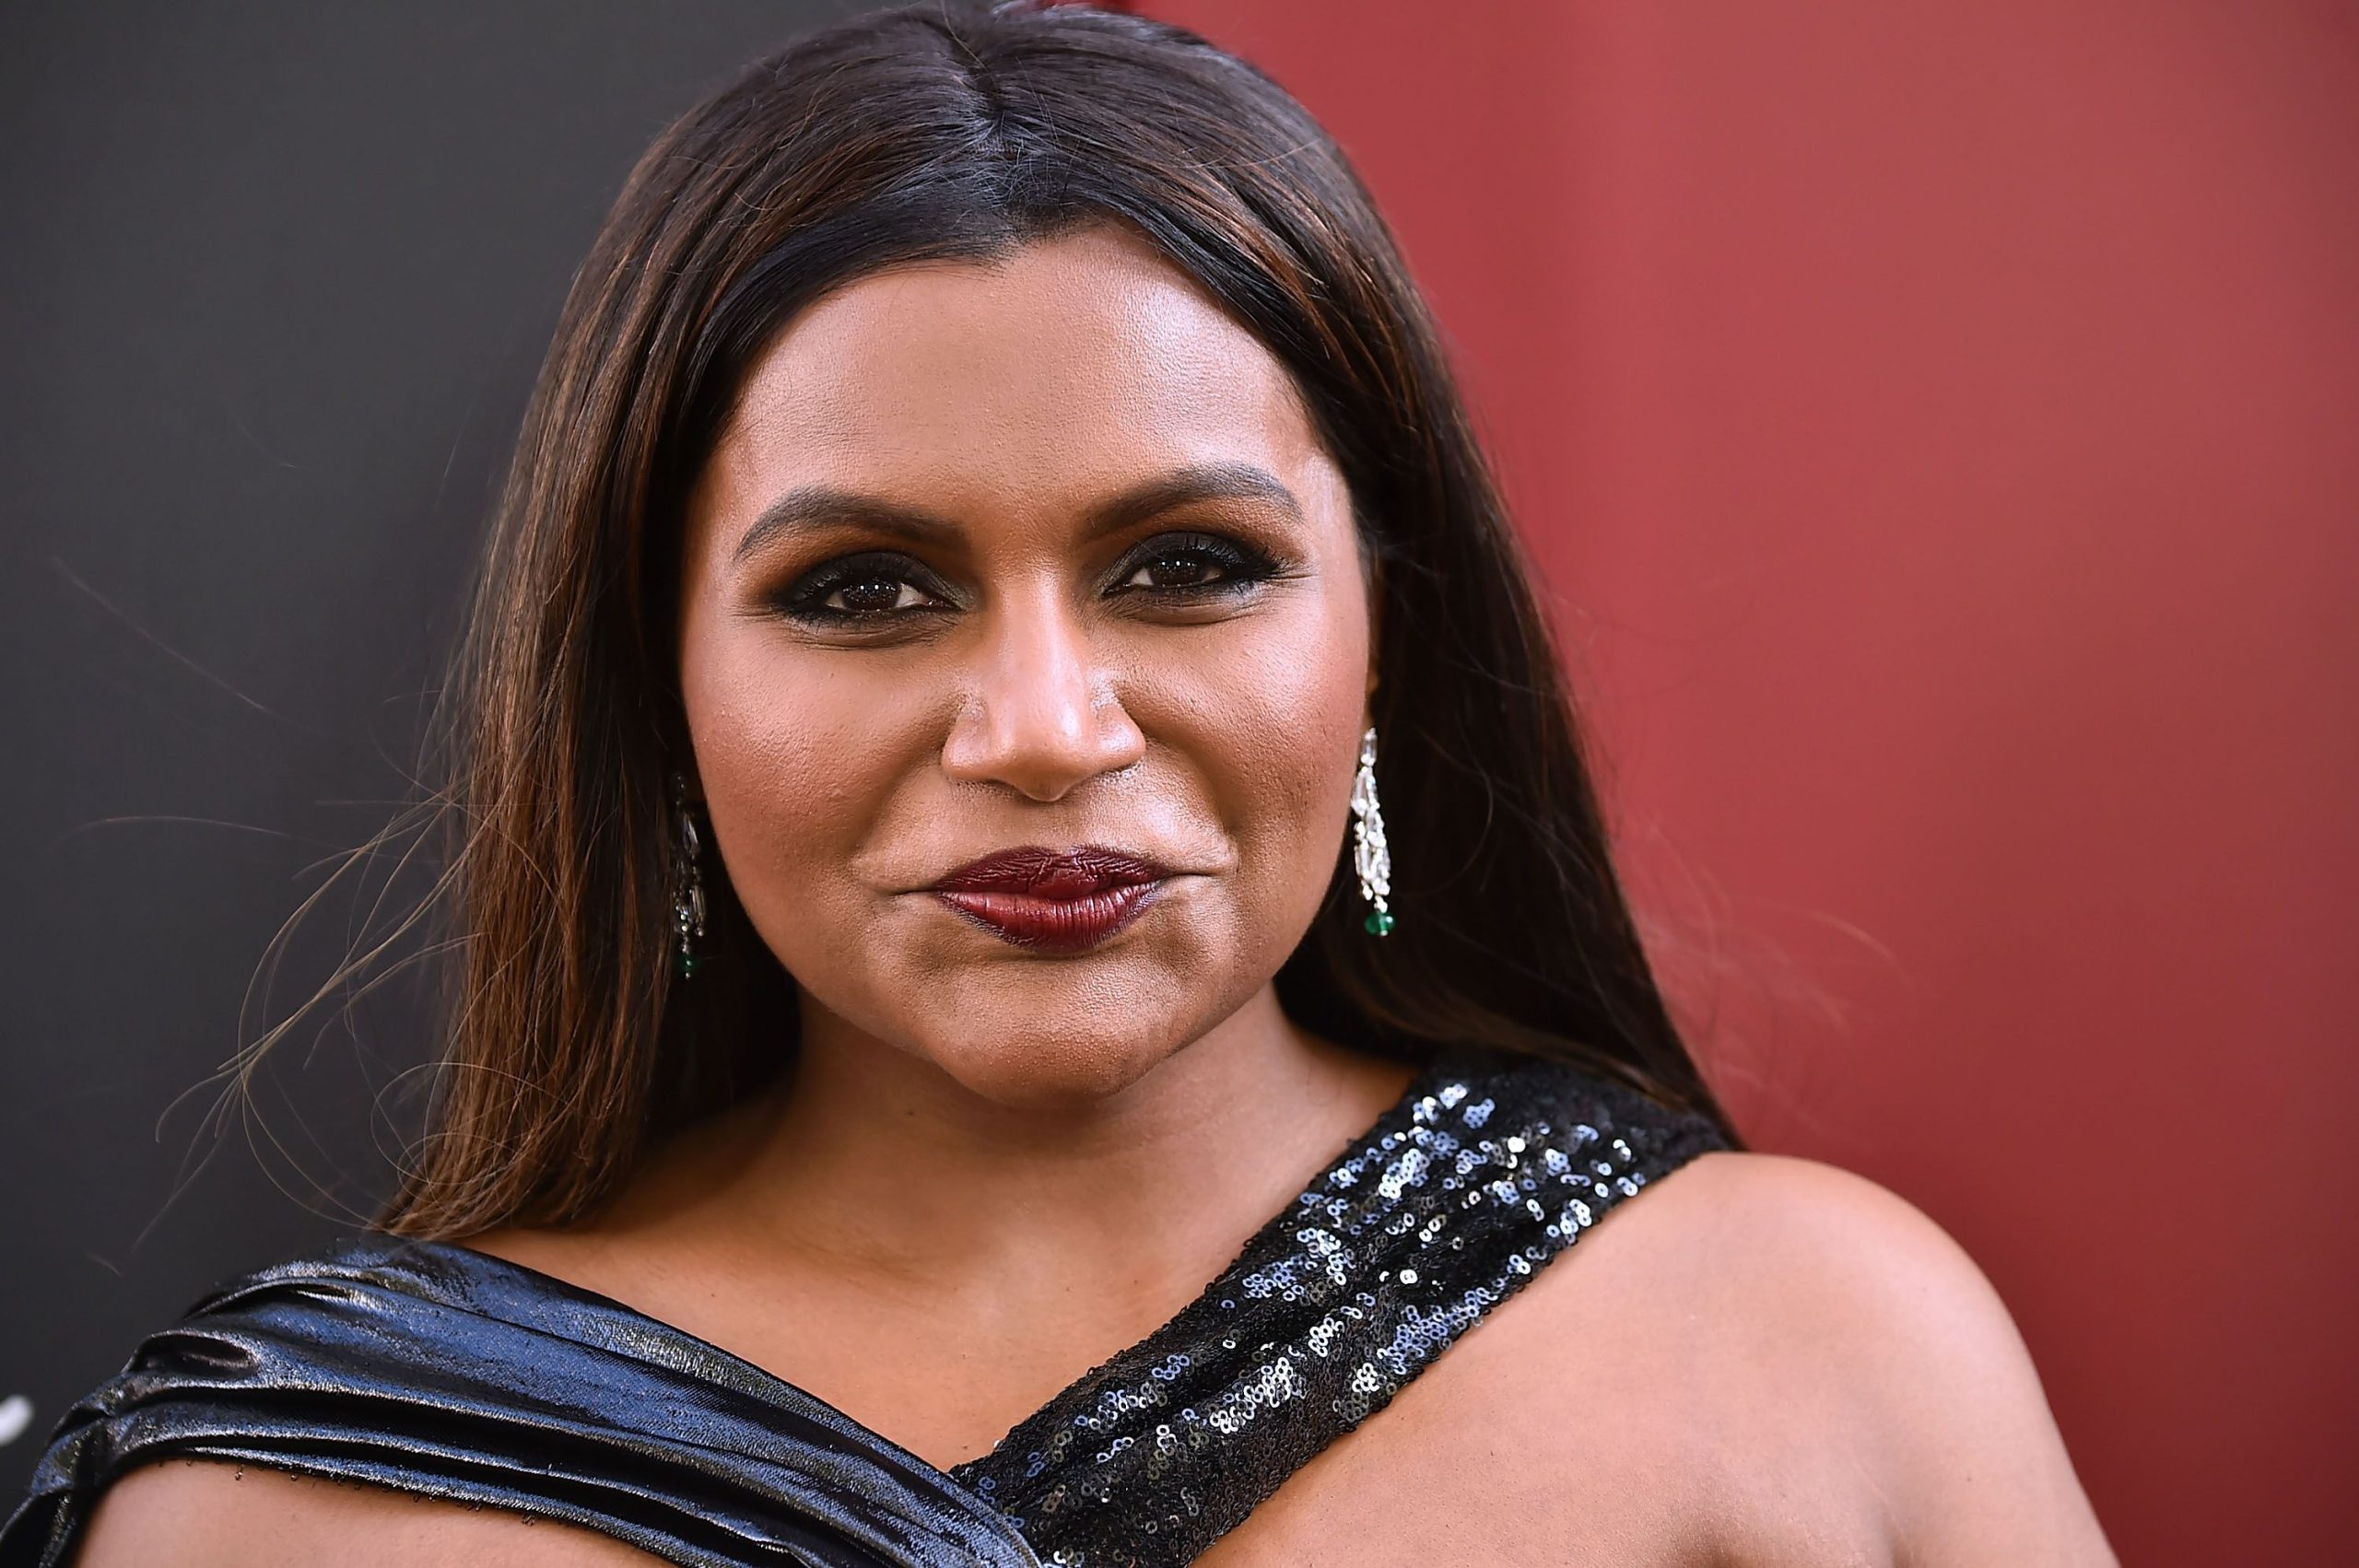 How Rich is Mindy Kaling?